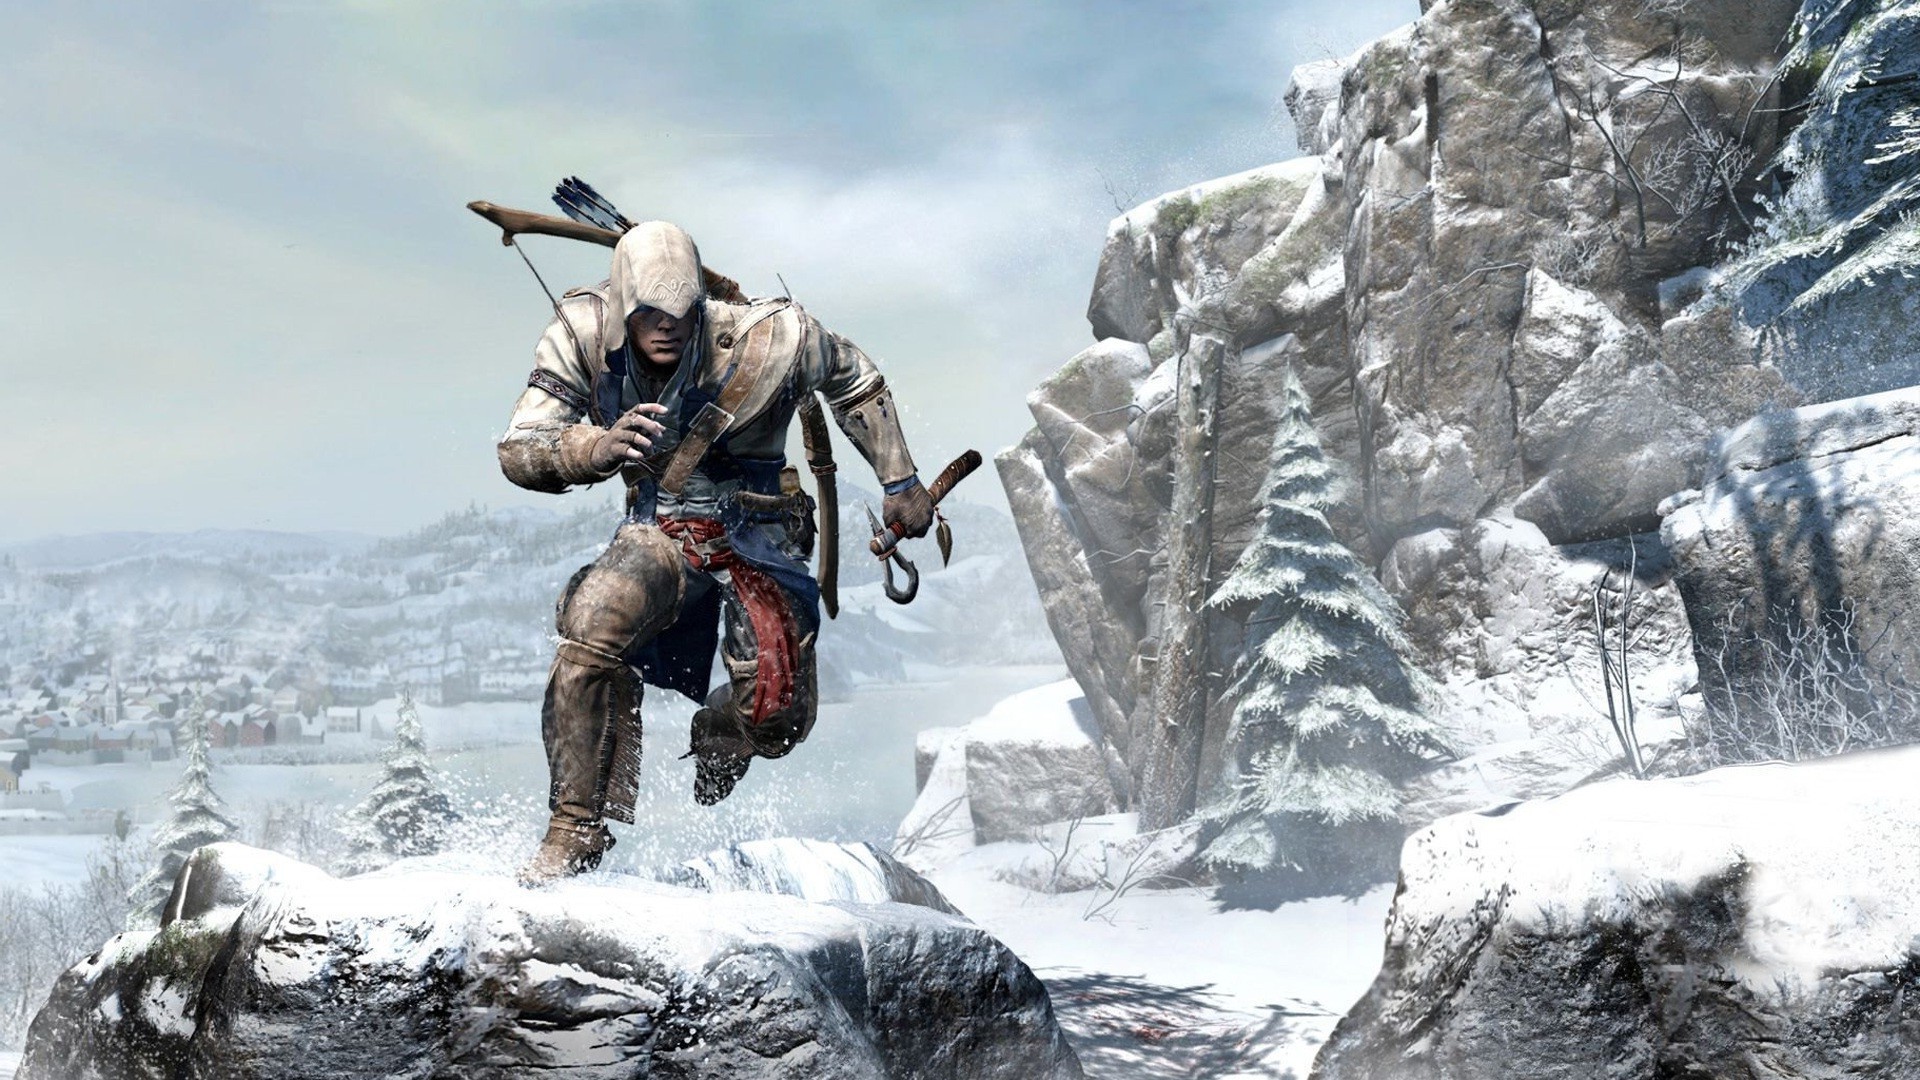 Assassins Creed Iii Connor Kenway American Revolution - Assassins Creed 3 Snow , HD Wallpaper & Backgrounds